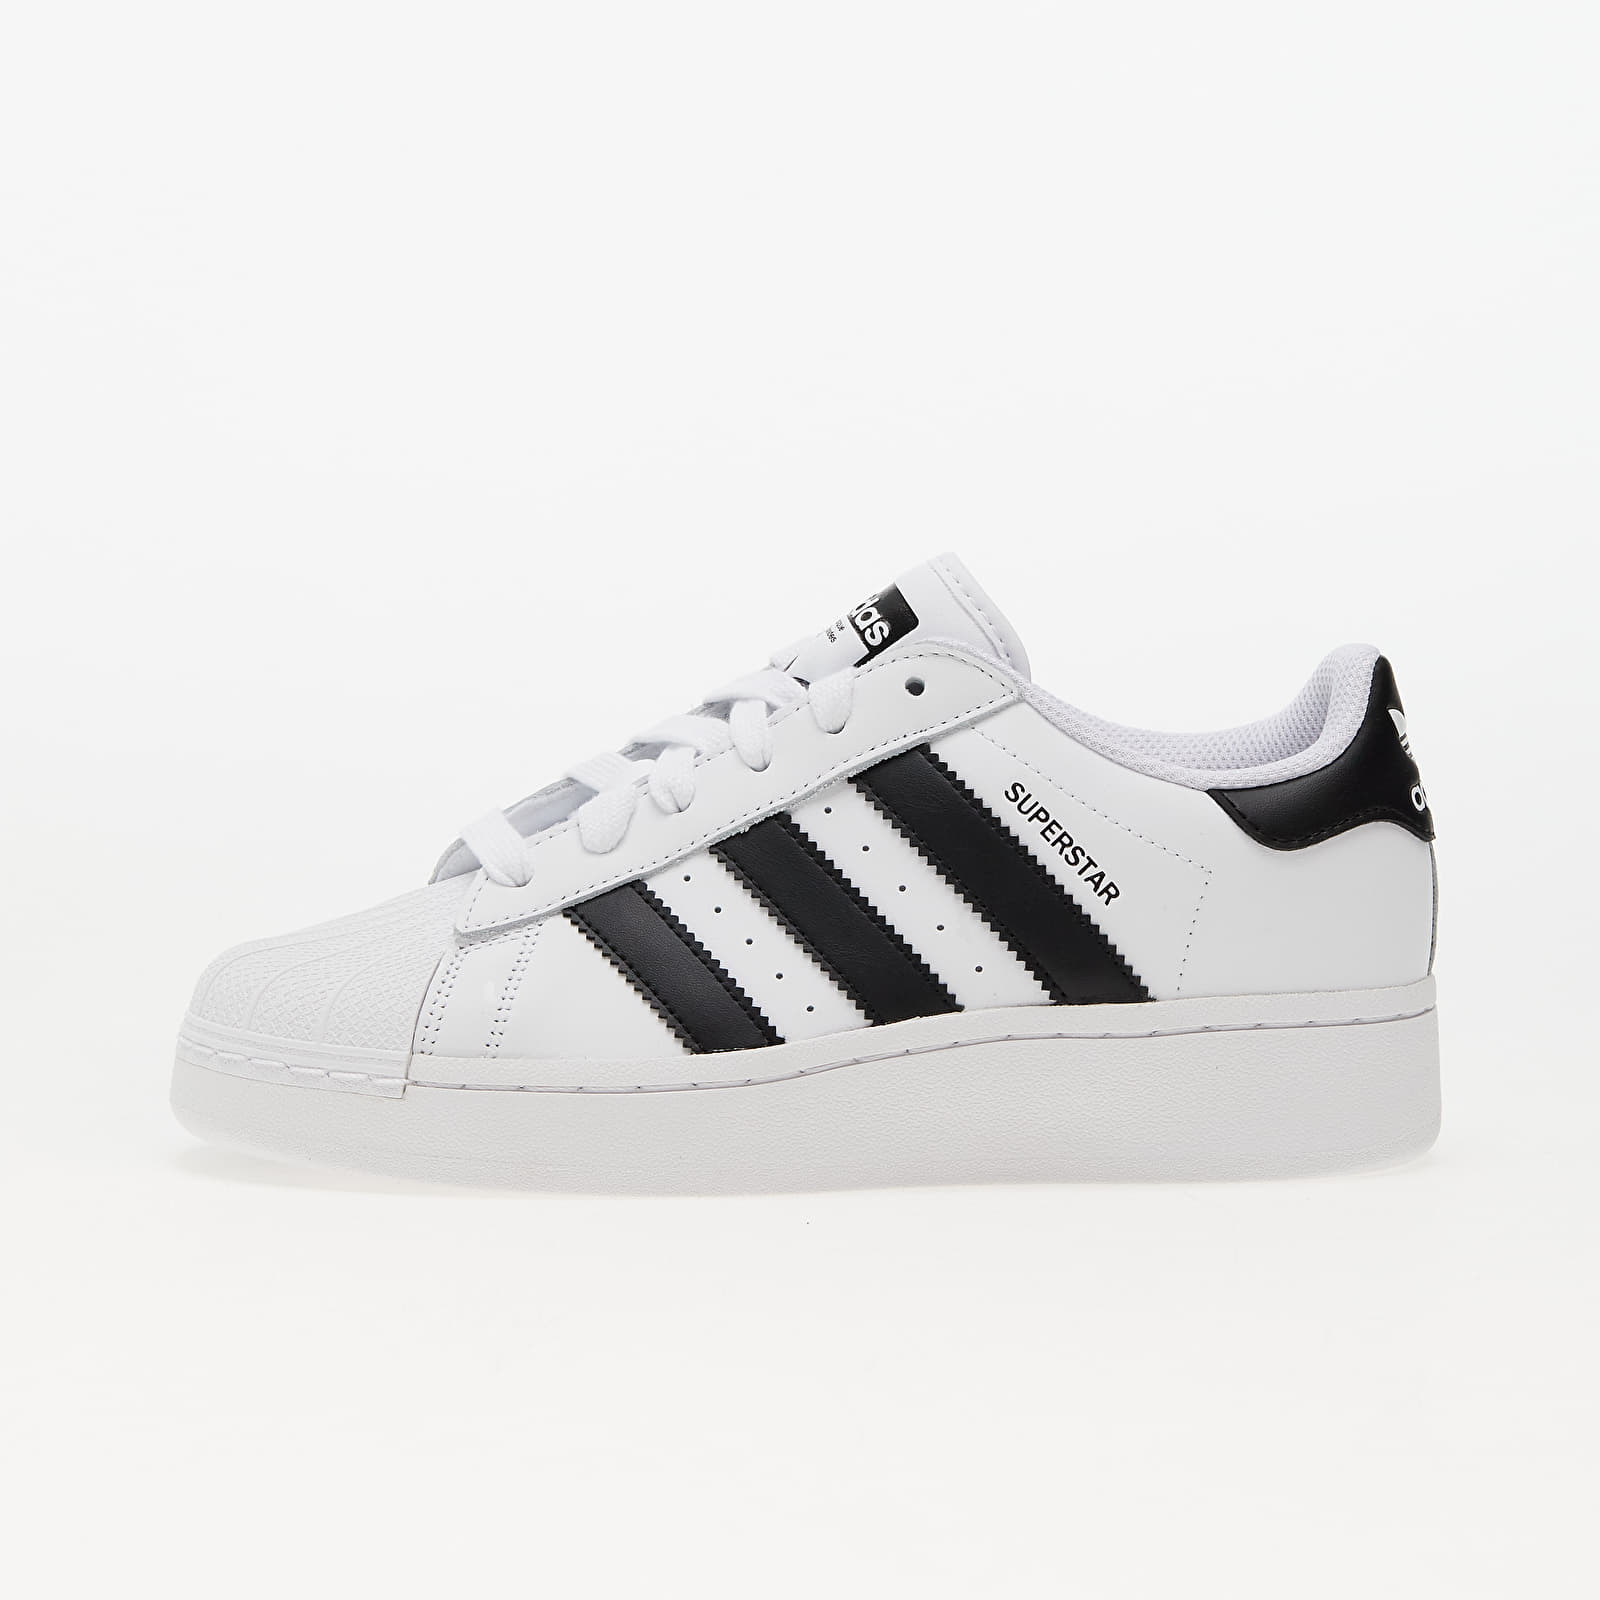 adidas Superstar Xlg W Ftw White/ Core Black/ Ftw White adidas